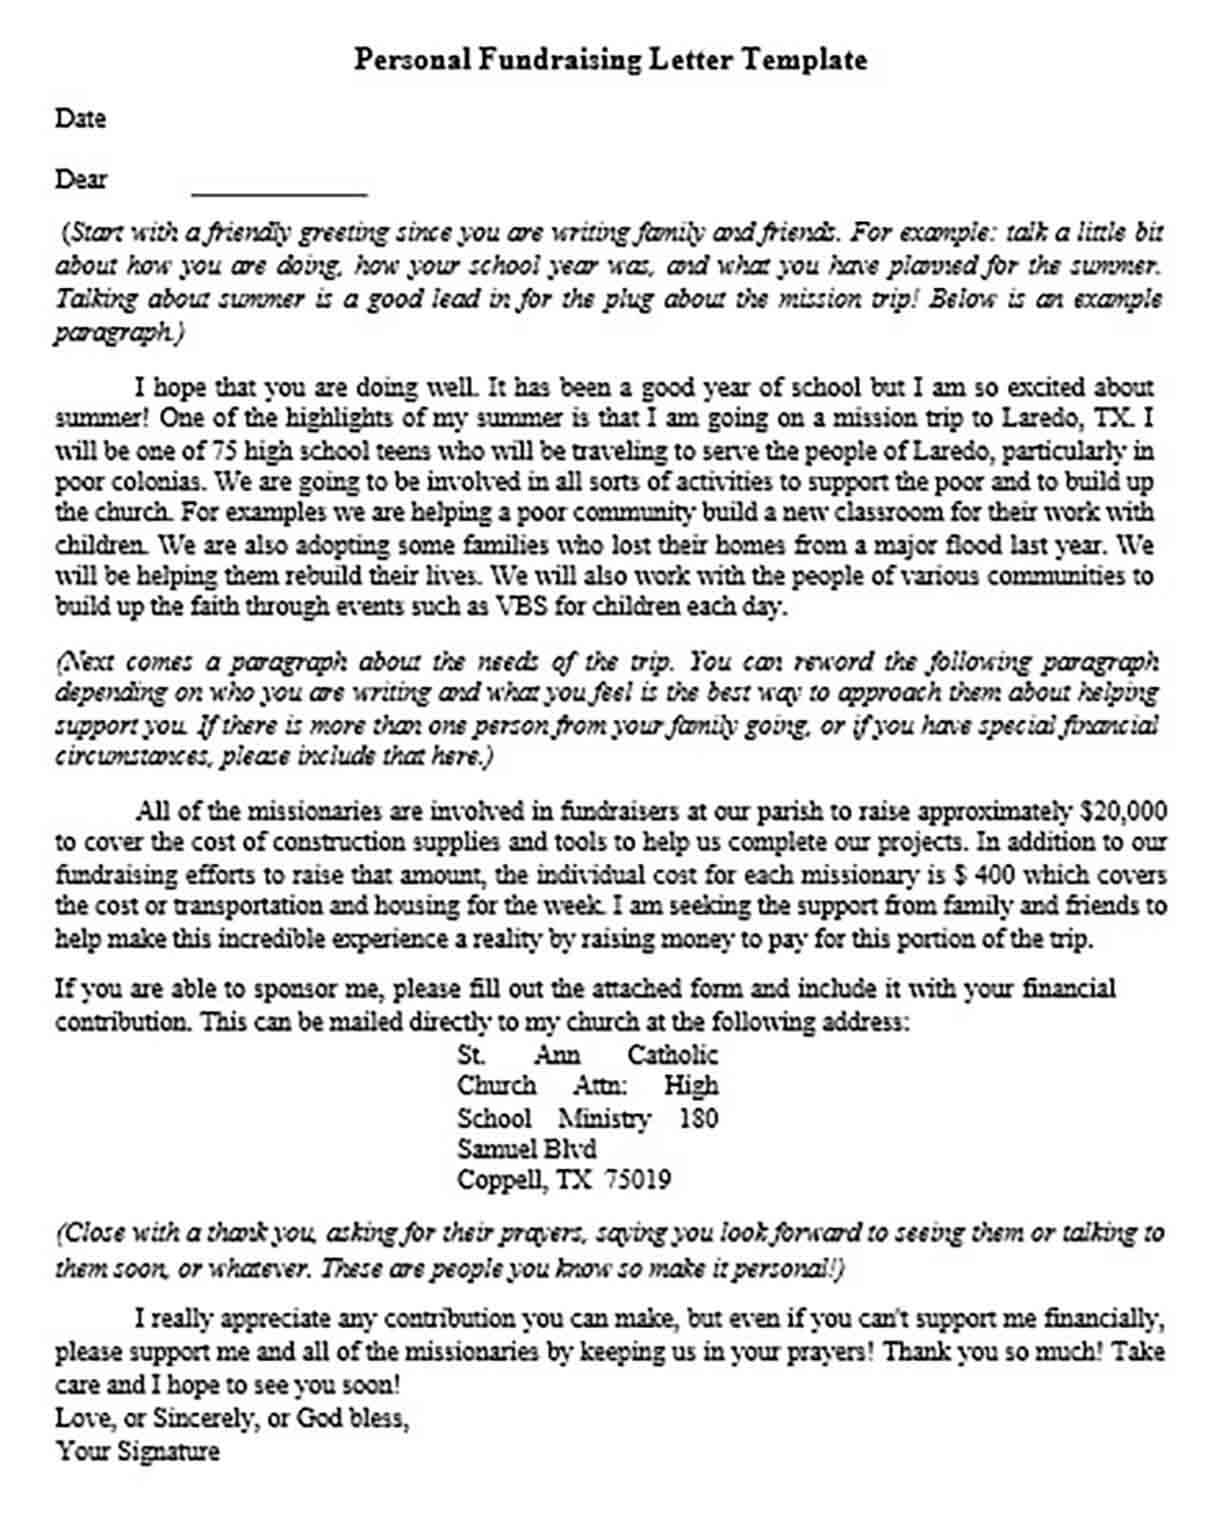 Personal Fundraising Letter